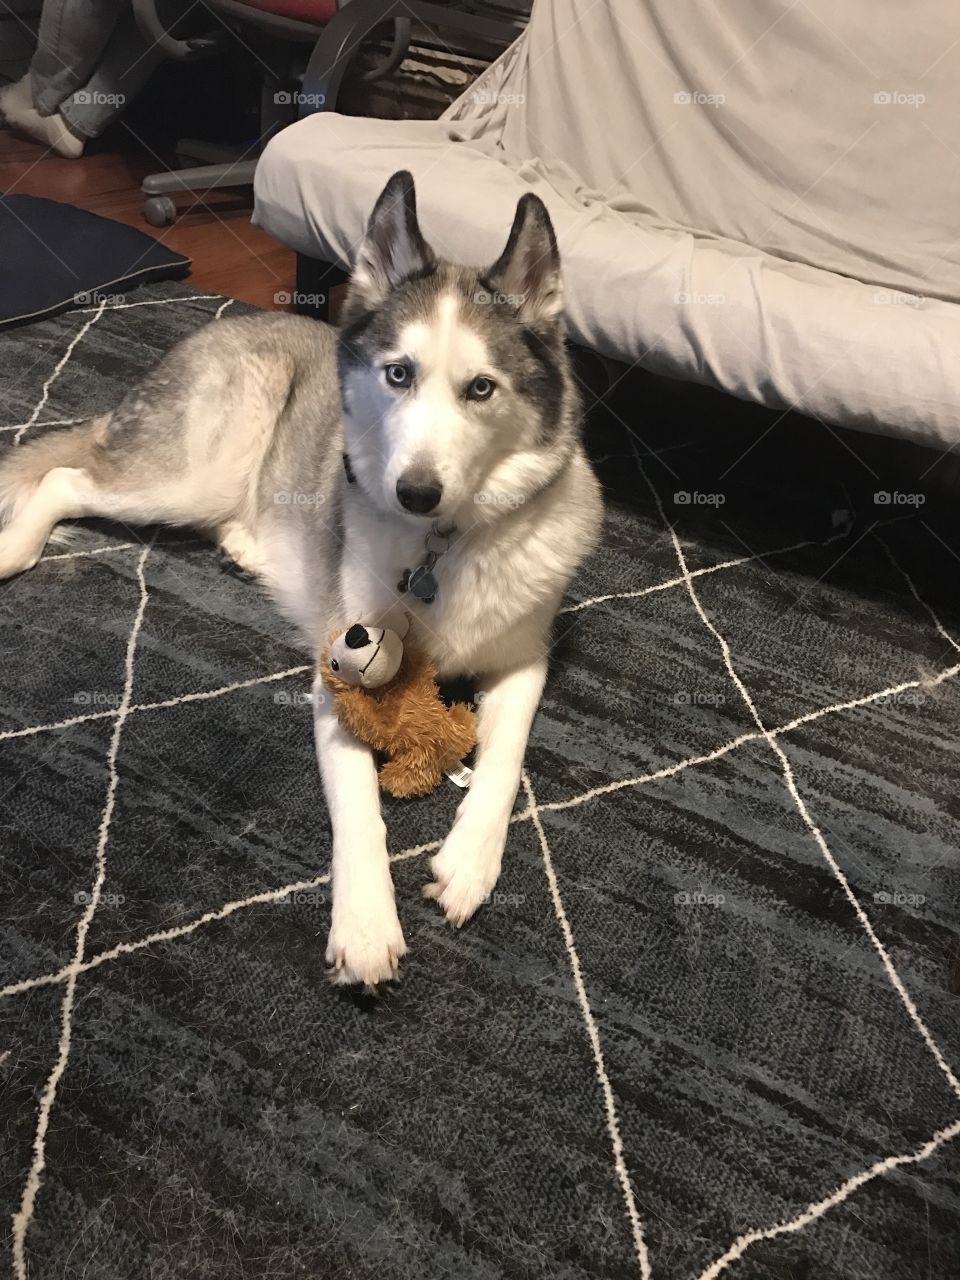 Orion and his current favorite toy